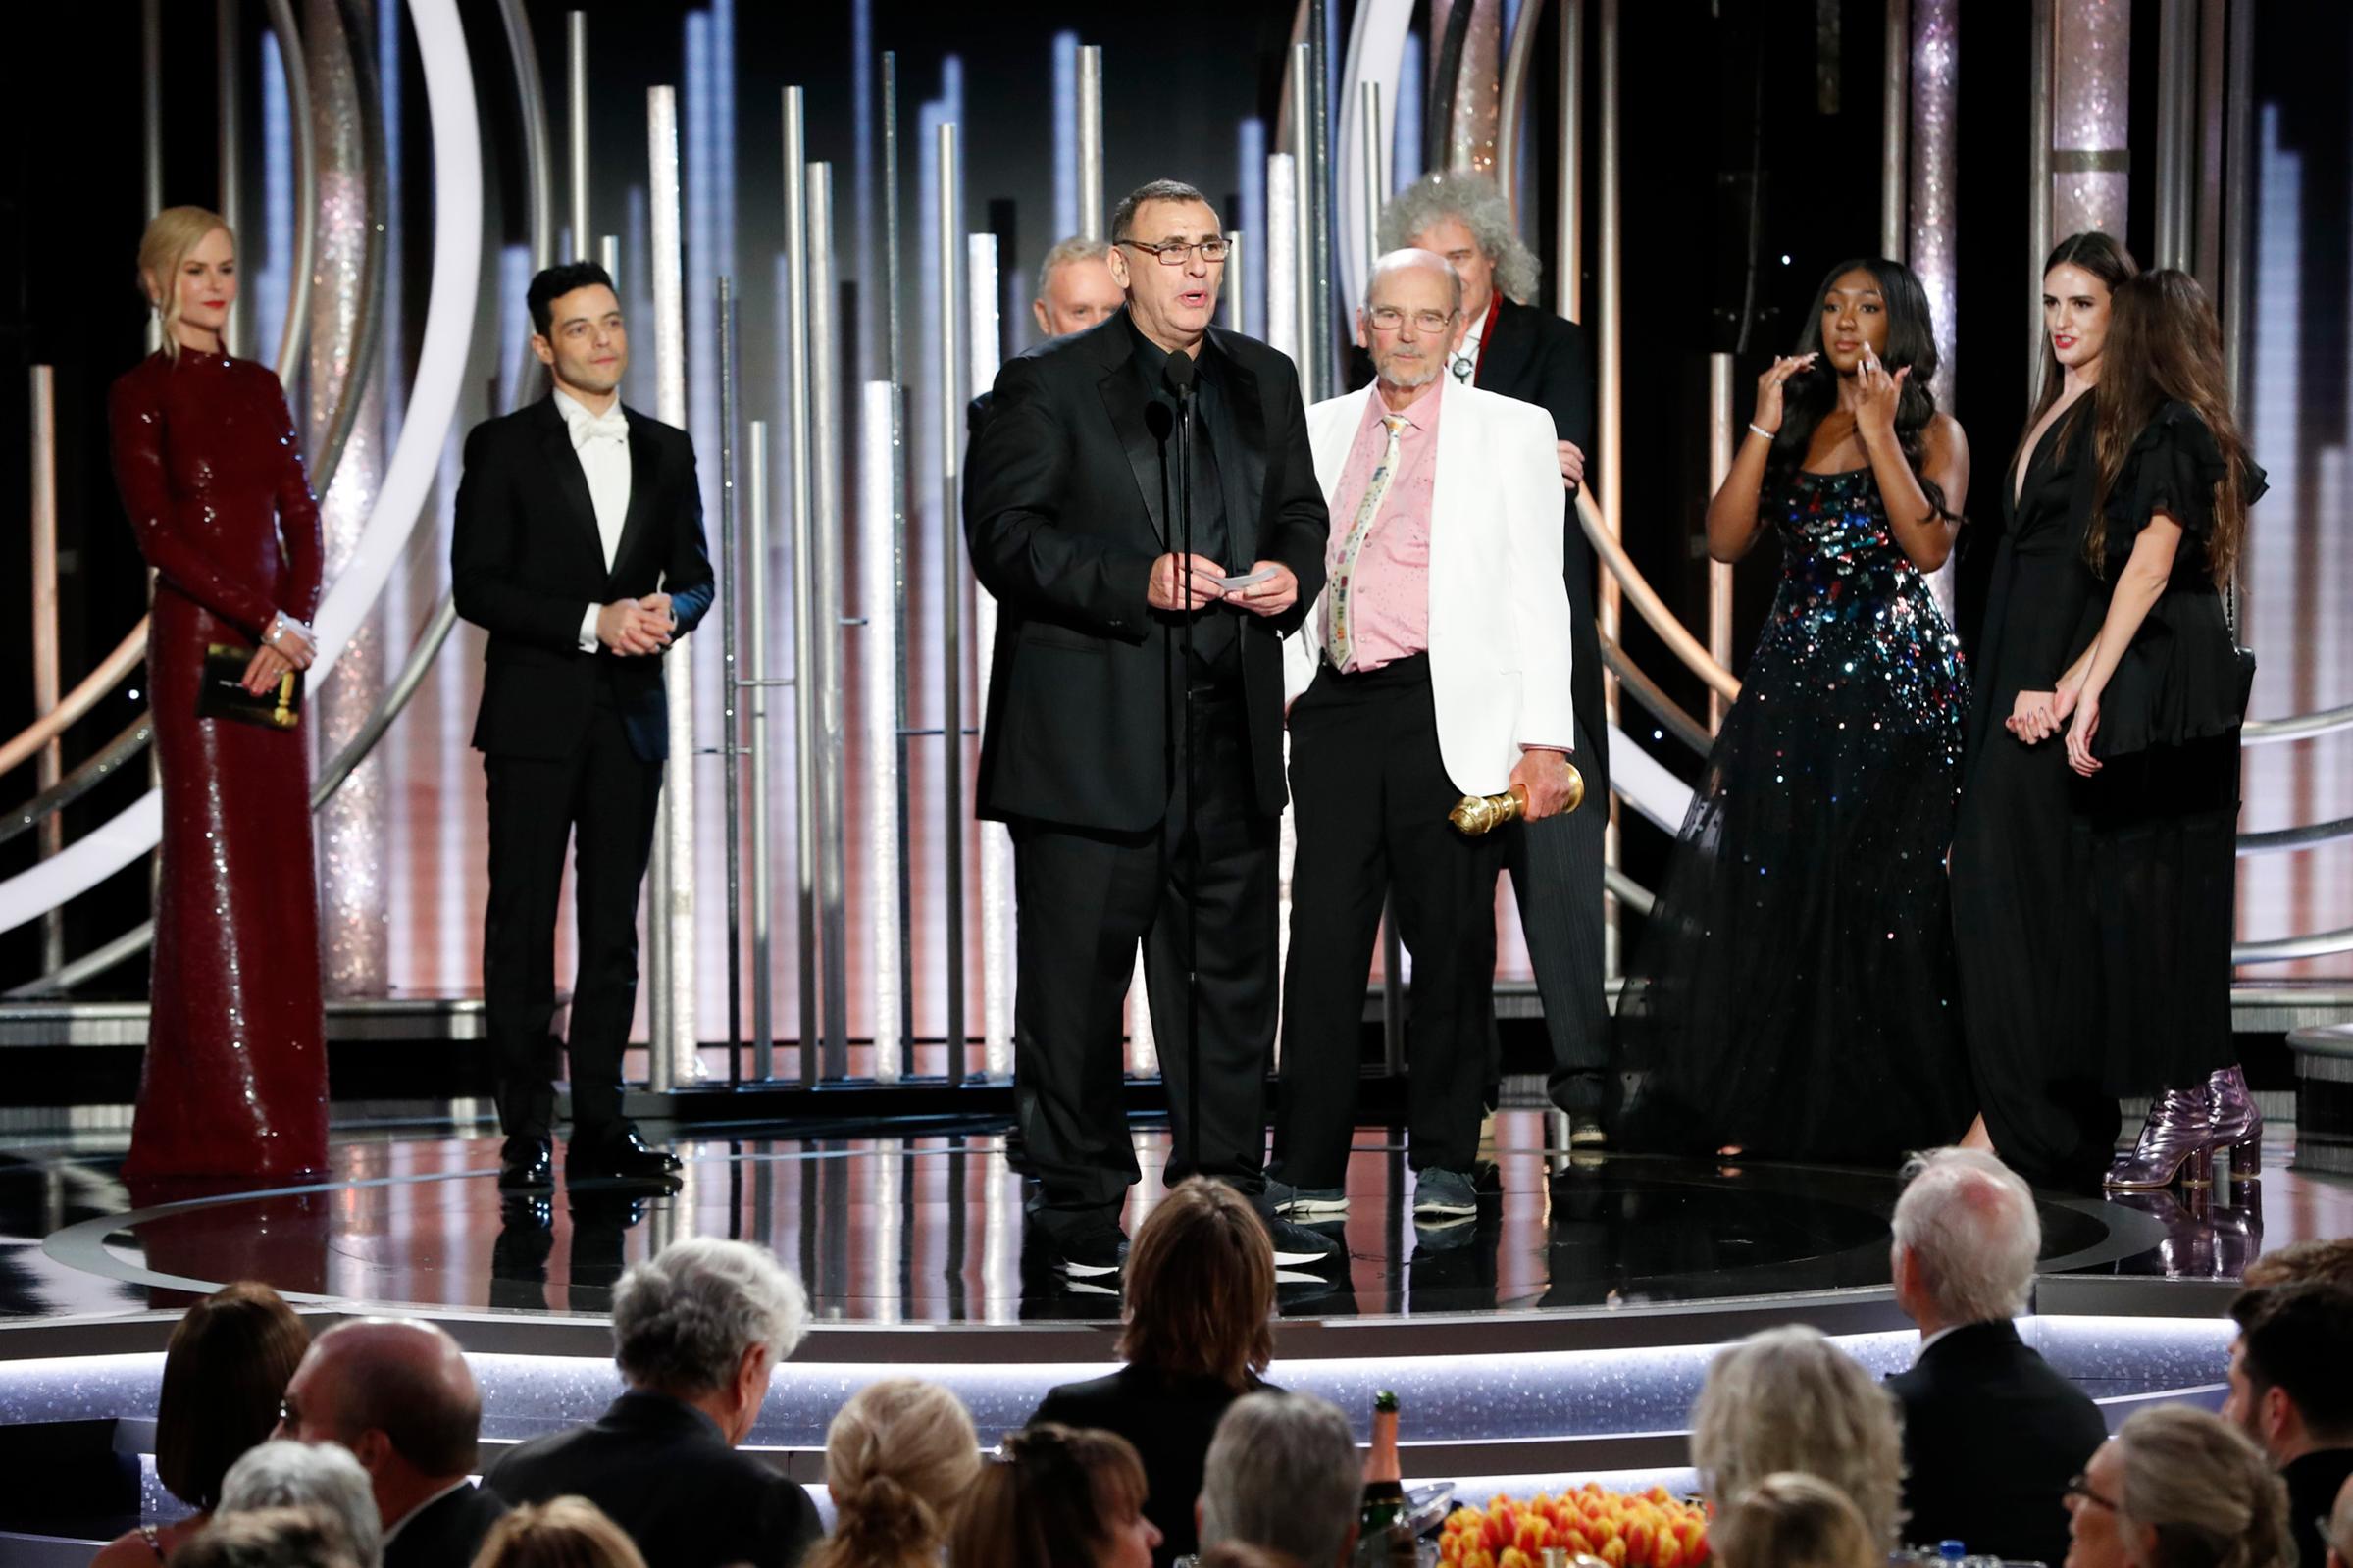 Jim Beach accepts the Best Motion Picture – Drama award for “Bohemian Rhapsody” onstage during the 76th Annual Golden Globe Awards.